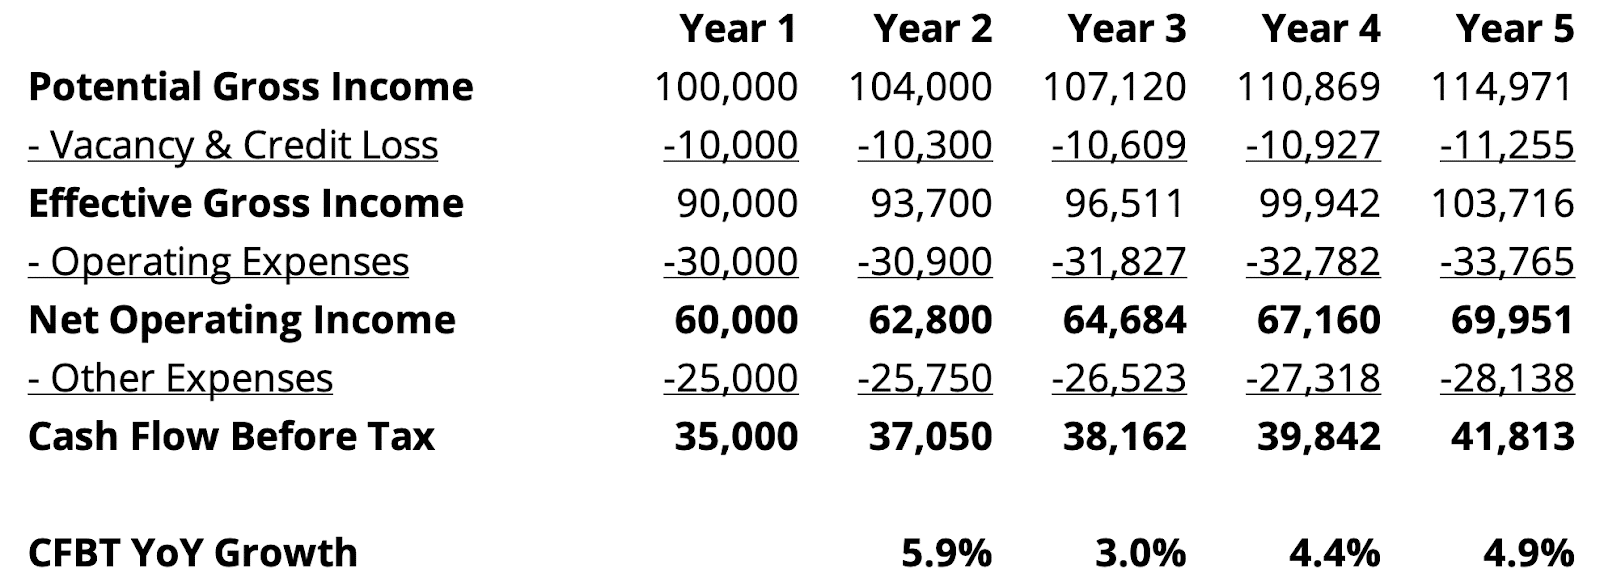 How to Calculate Year over Year (YoY) Growth